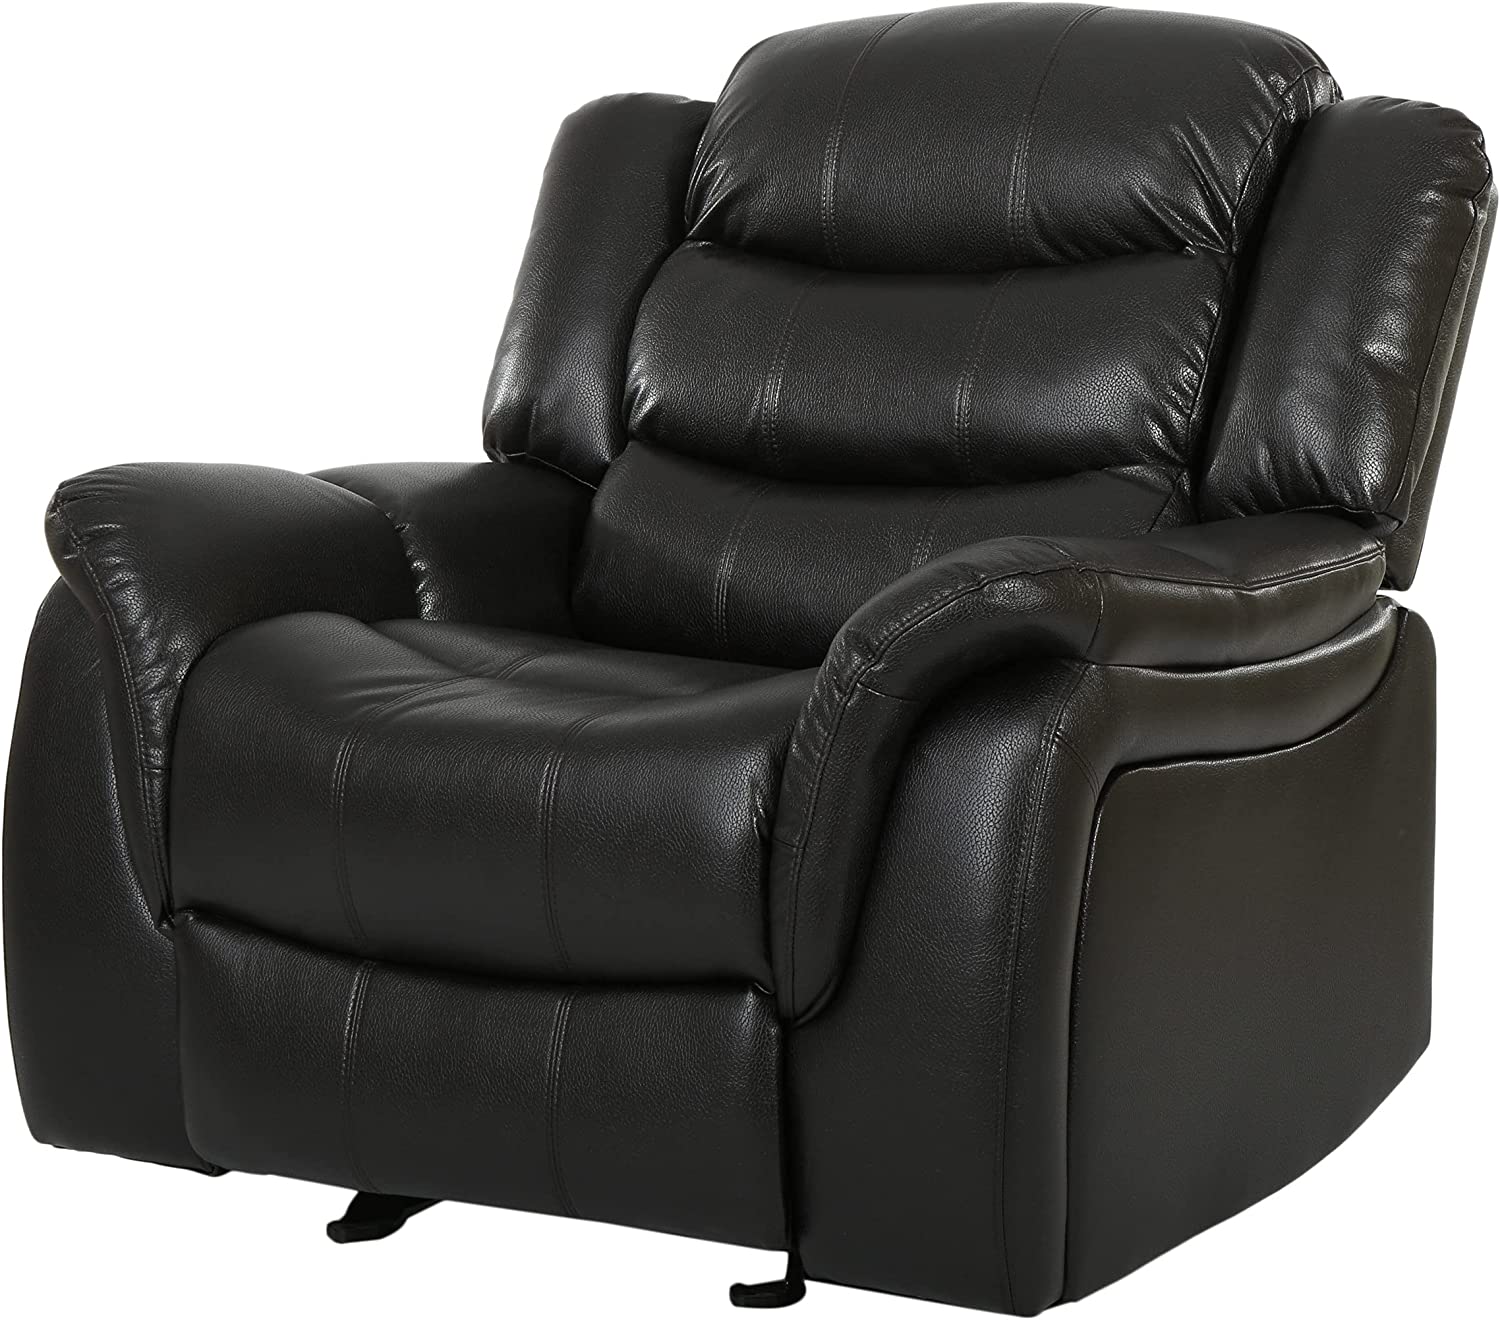 GDFStudio CHRISTOPHER KNIGHT HOME Recliner Glider Chair